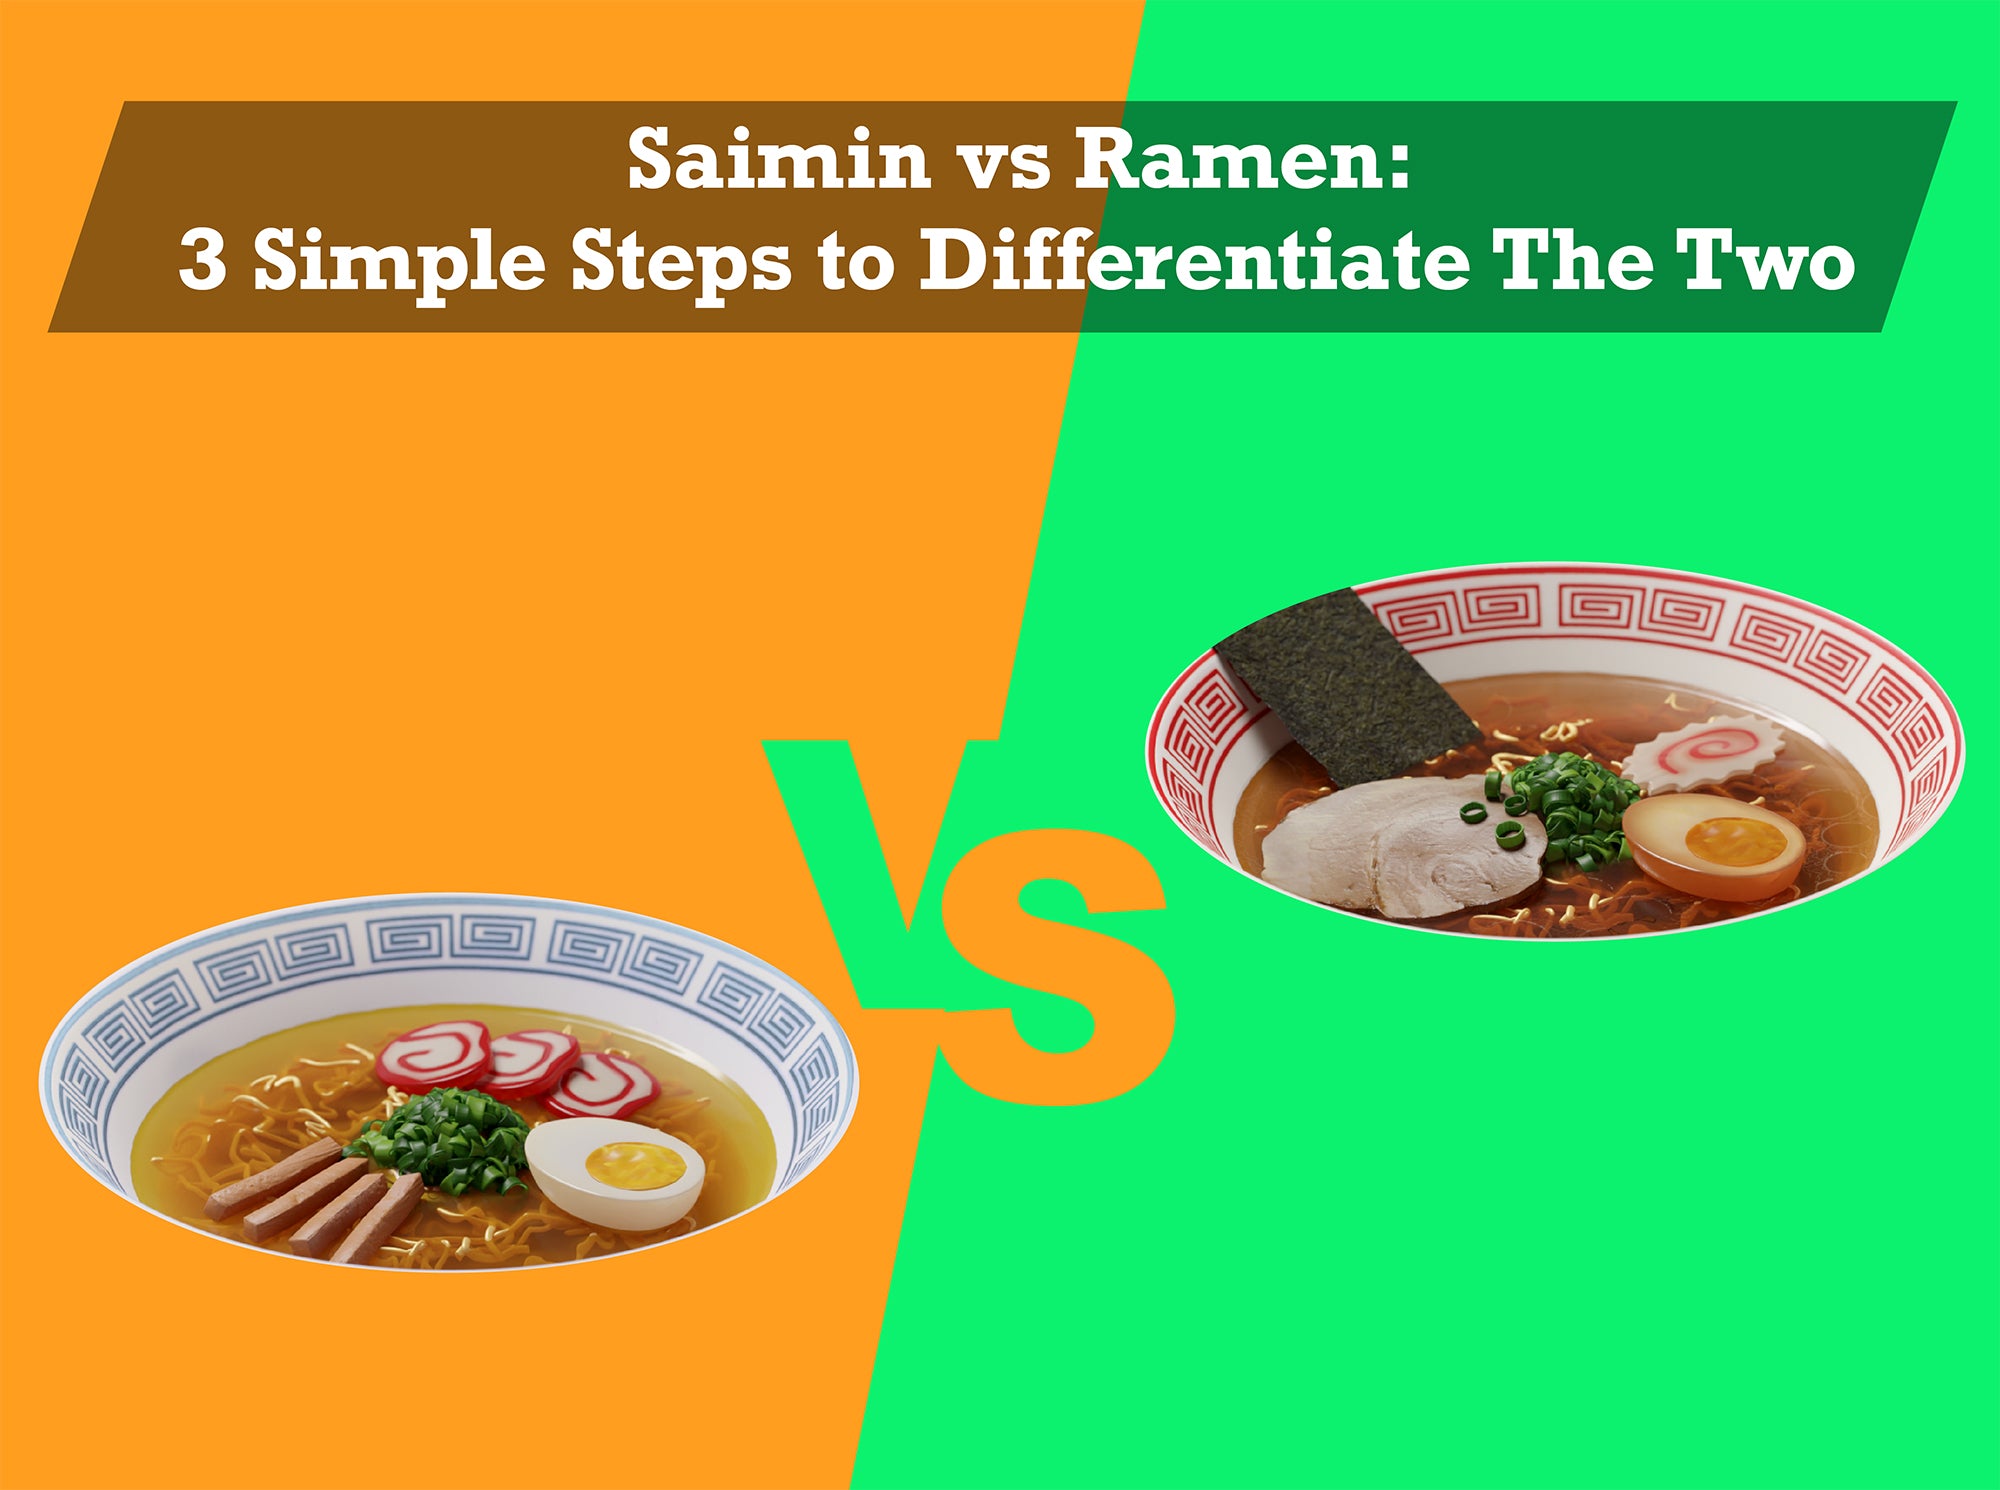 Saimin vs Ramen: 3 Simple Steps to Differentiate The Two